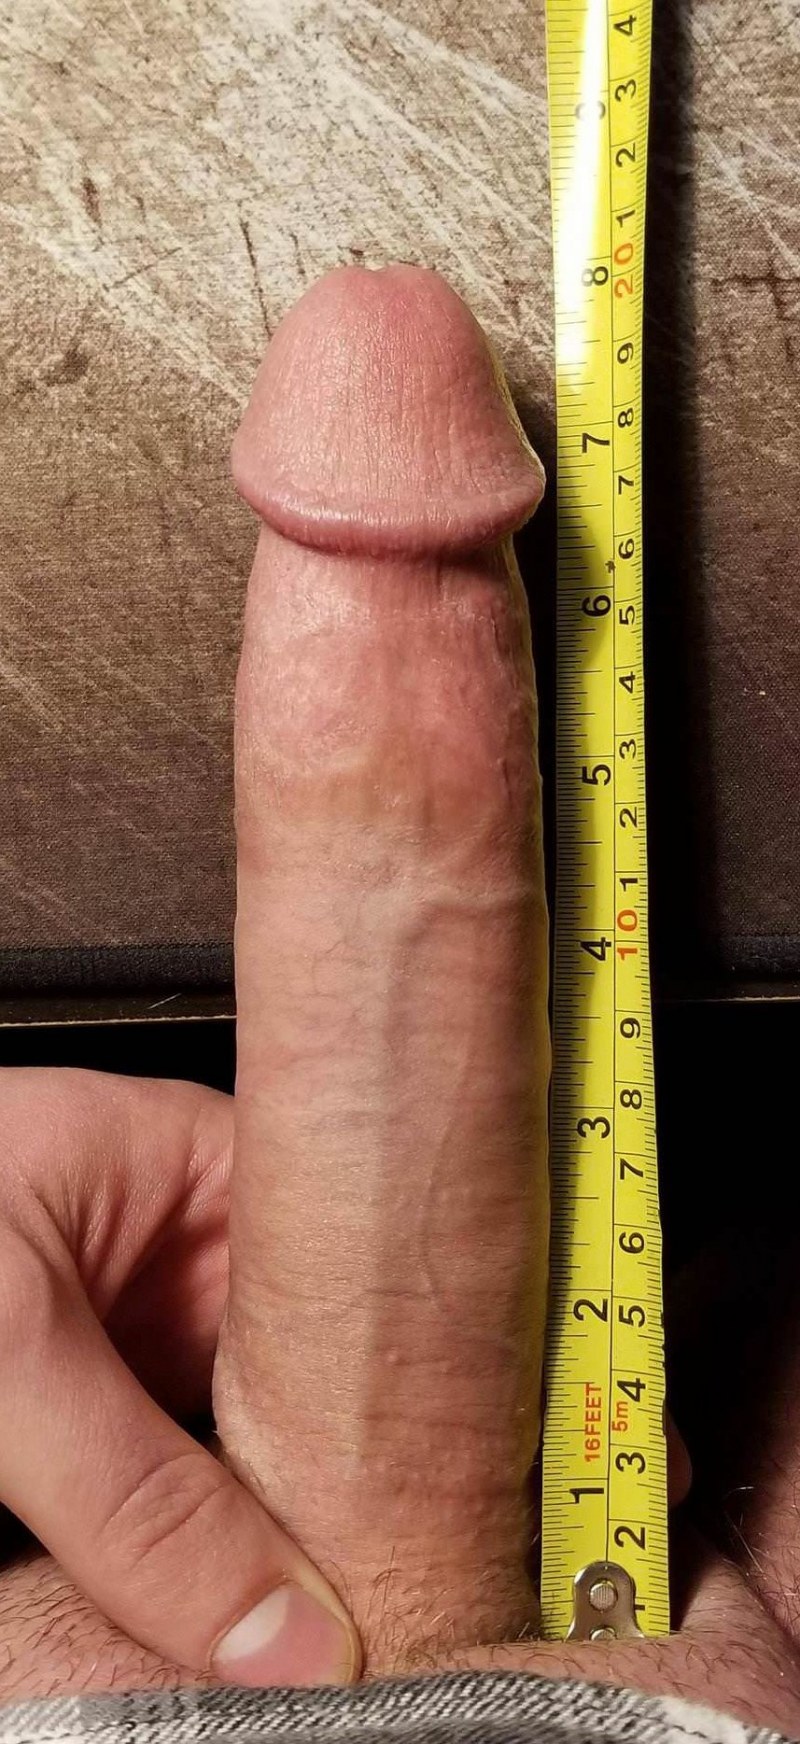 6.5 6 1 2 perfect dick size